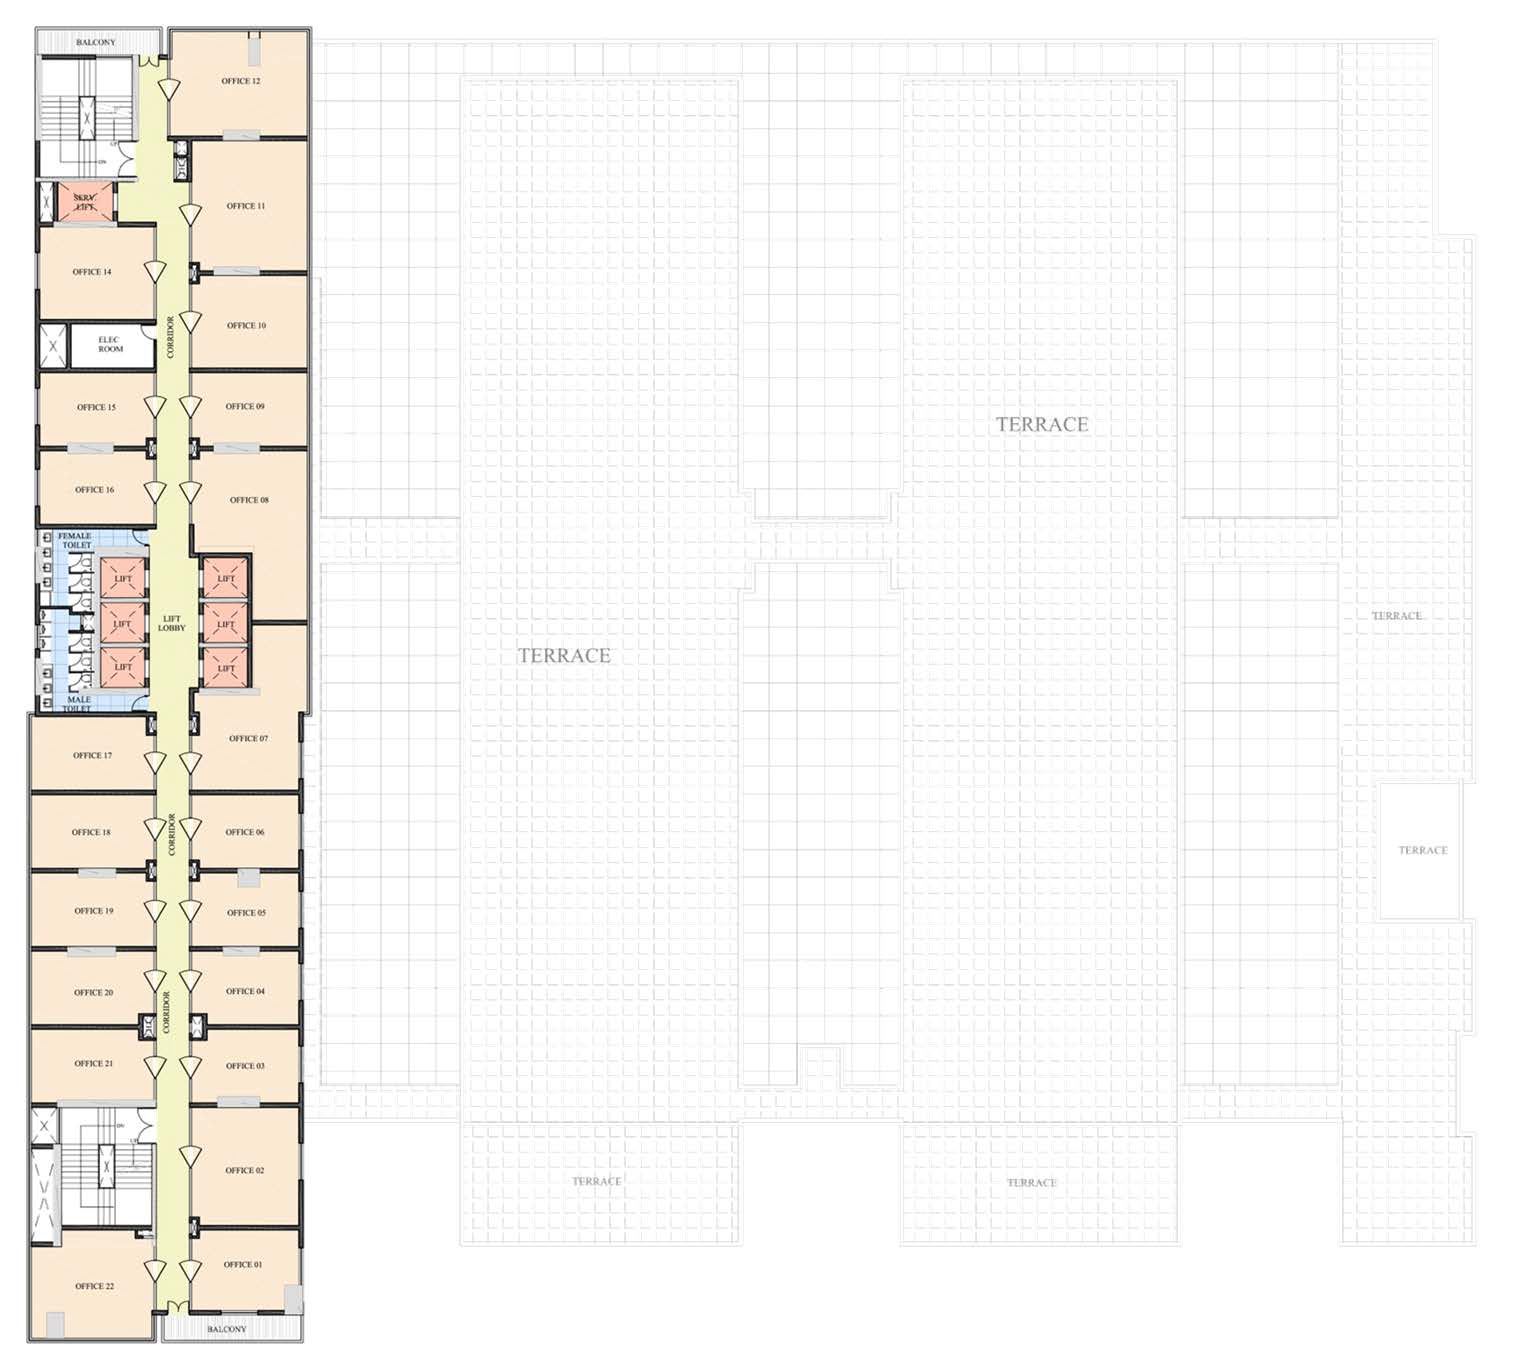 5th to 28th Floor Plan